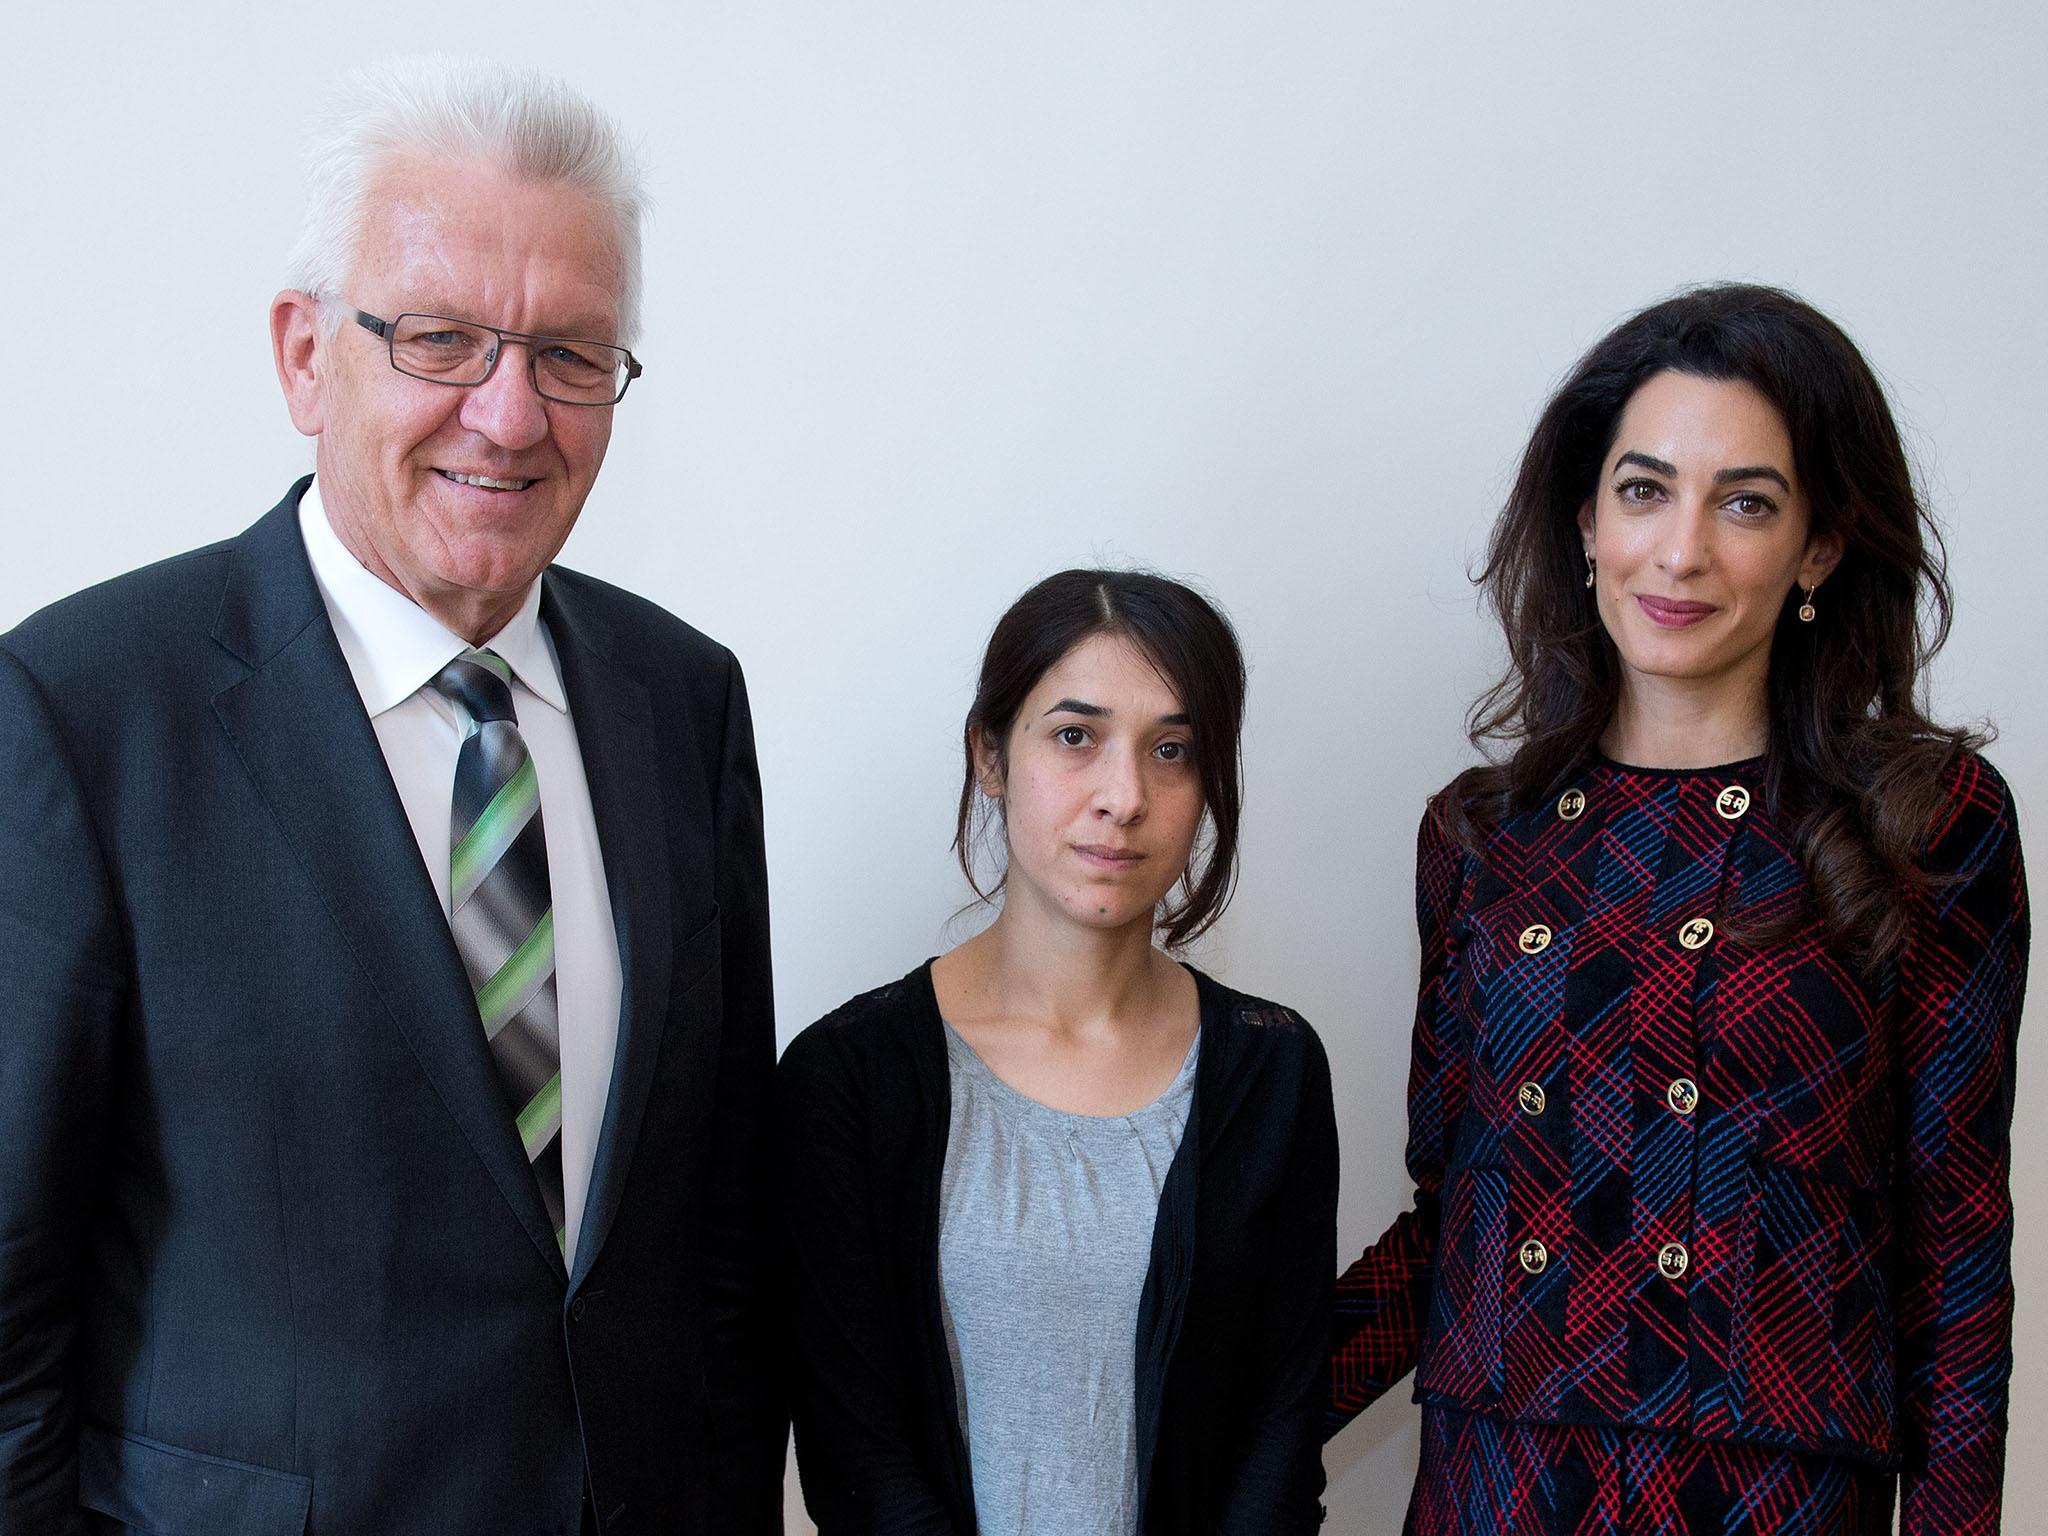 Premier of federal state Baden-Wuerttemberg Winfried Kretschmann (L) meets with Yezidi woman Nadia Murad (C) and British human rights attorney Amal Clooney (R) at the state ministry in Stuttgart, Germany, 12 September 2016. Amal Clooney is campaigning for international awareness of the Yezidi people's situation in the northern Iraq.